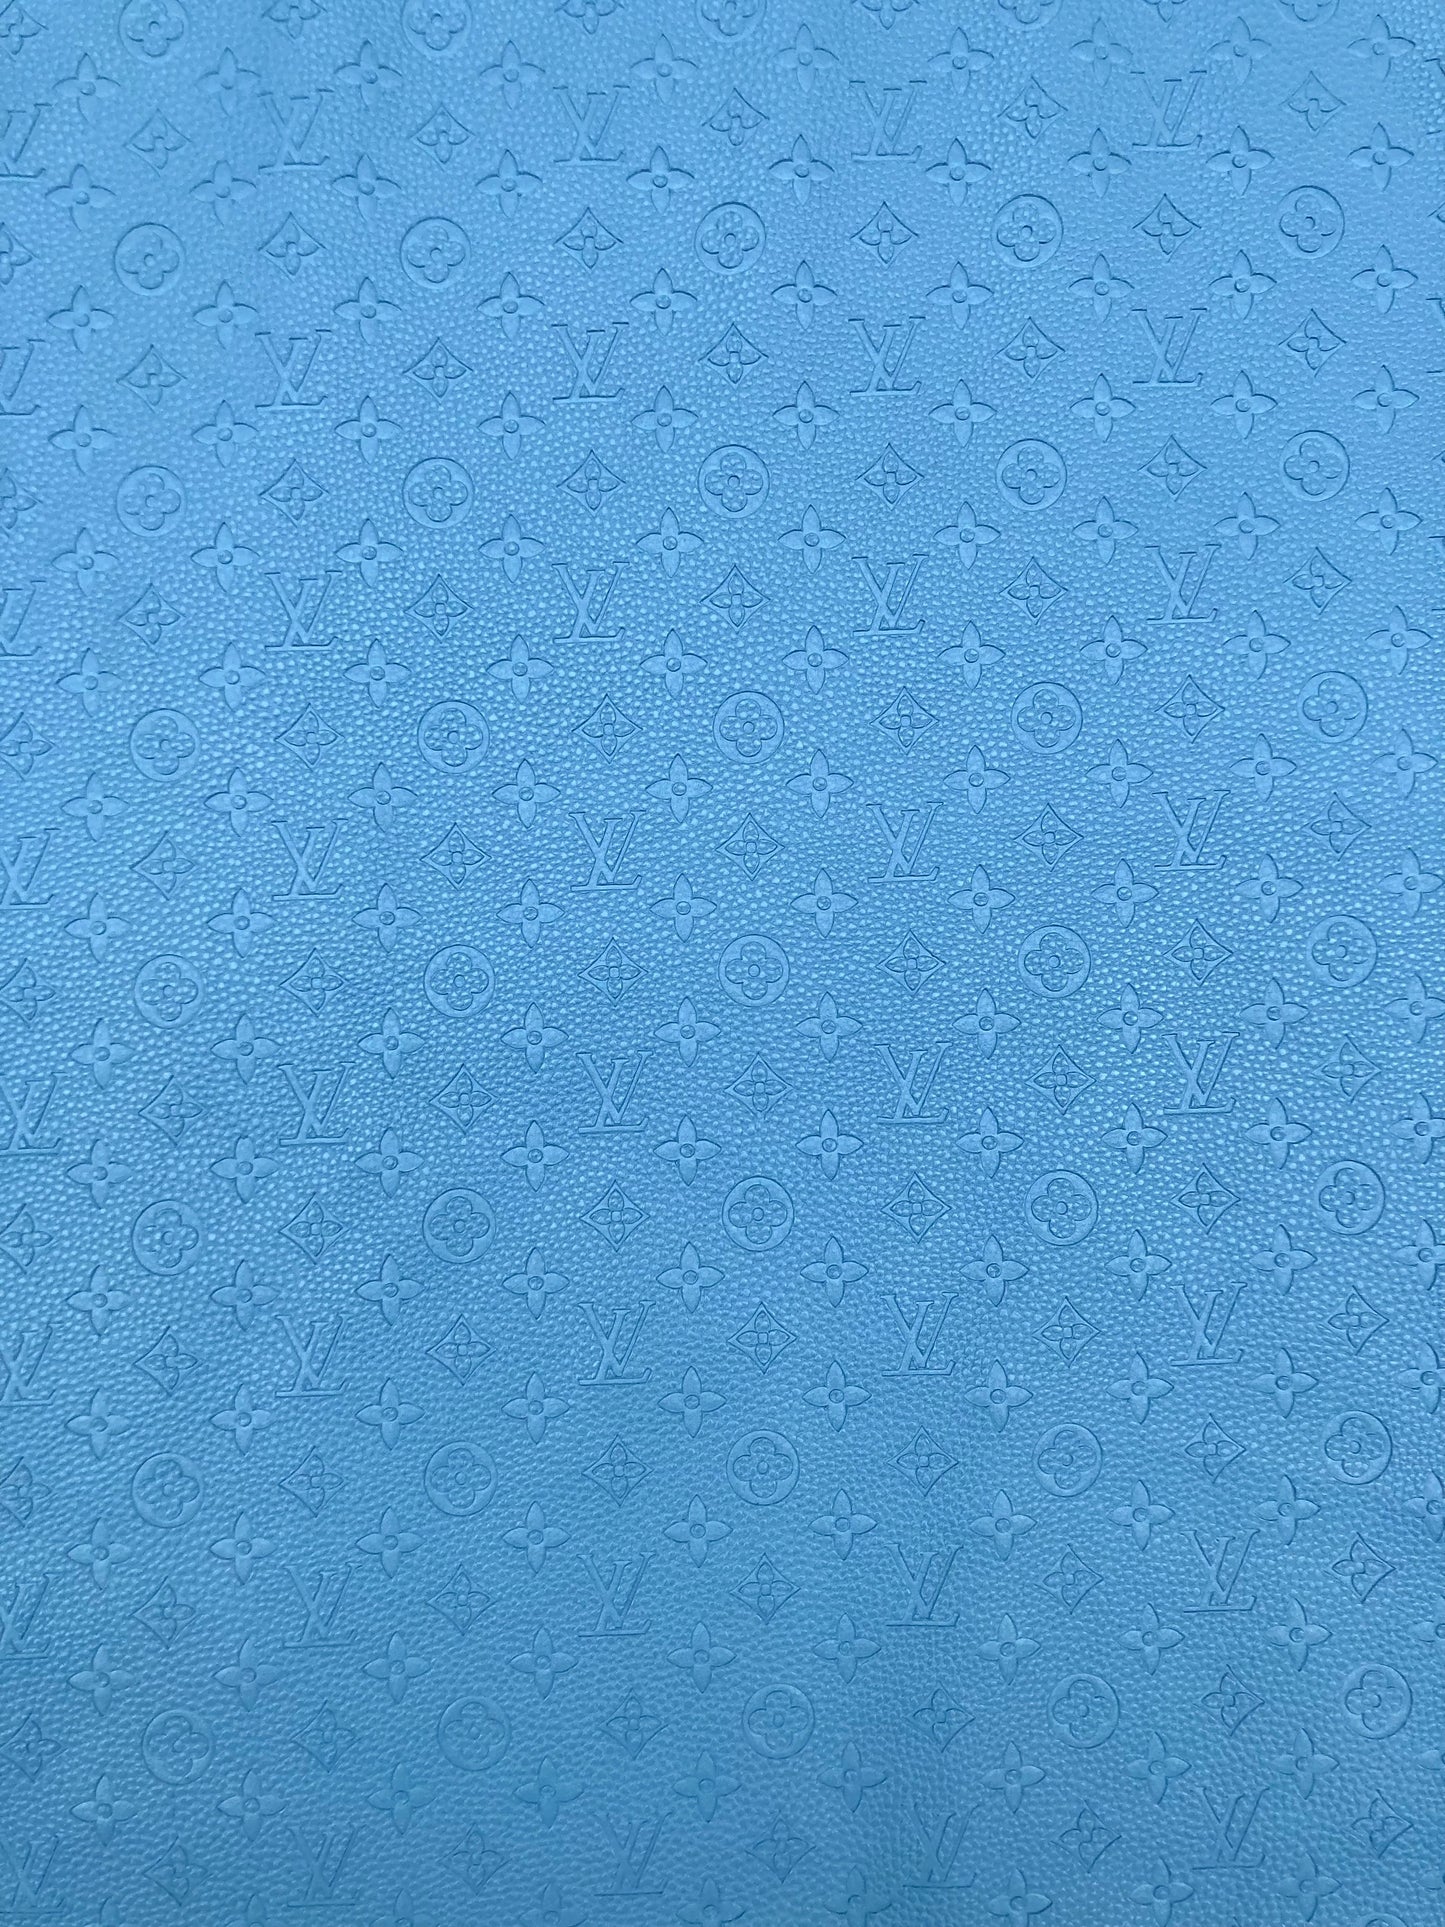 Handmade Baby Blue Embossed LV Leather Fabric for Custom Crafts Upholstery